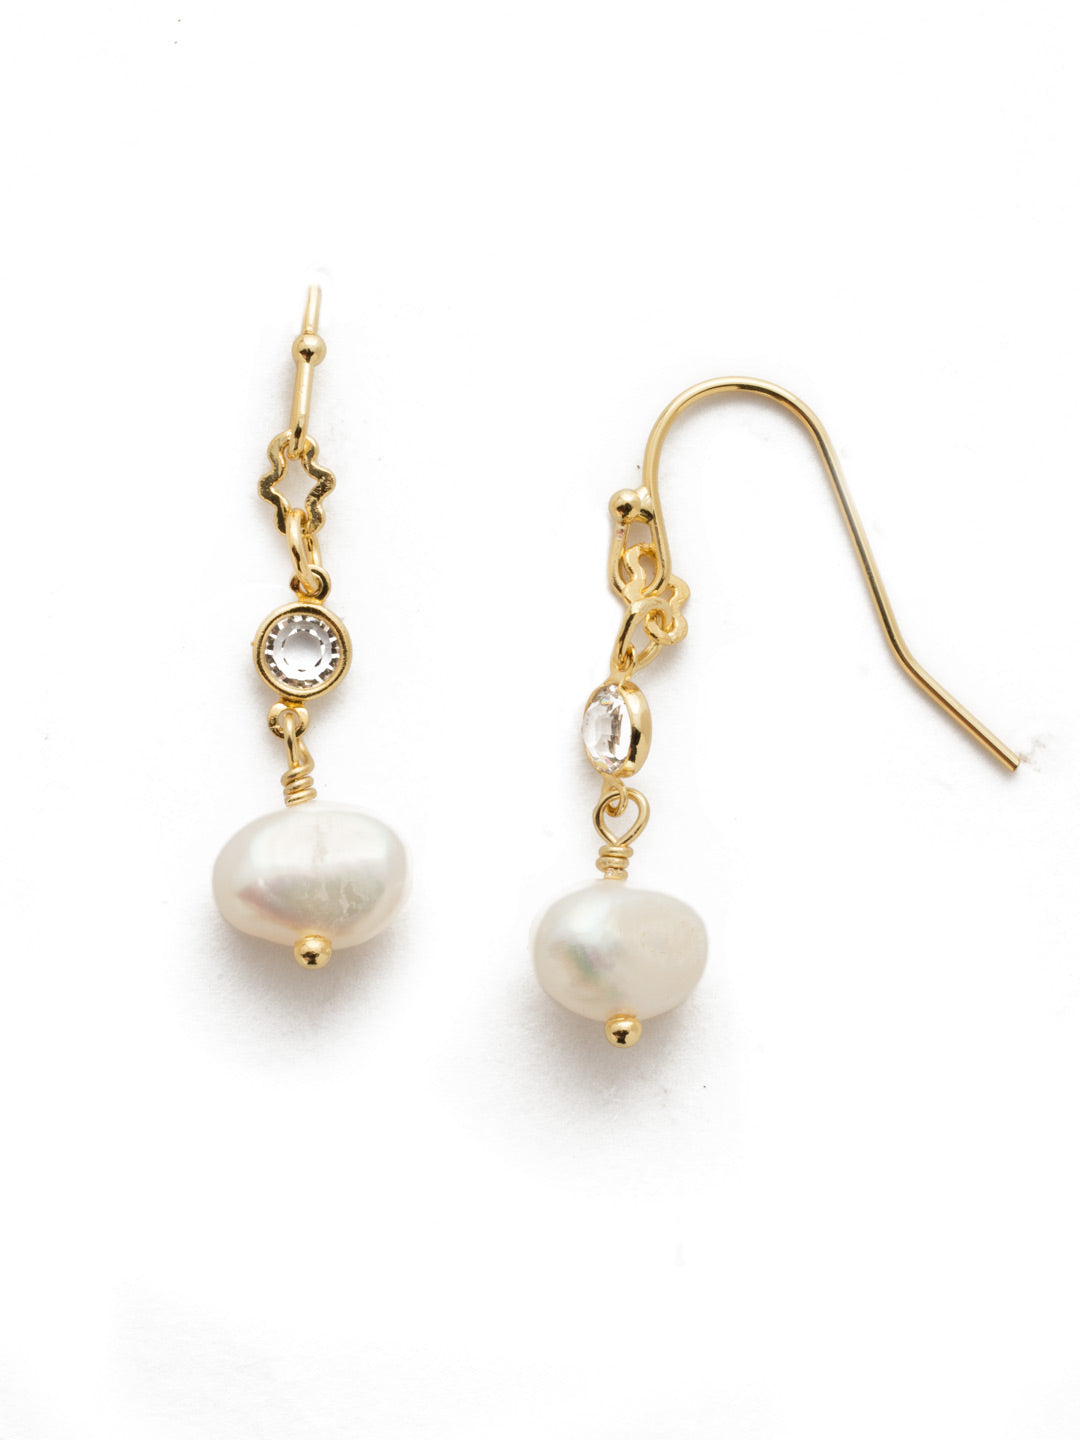 Priscilla Dangle Earring - EEK27BGCRY - <p>Freshwater pearl topped with a beautiful crystal will add sprakle to any occasion. From Sorrelli's Crystal collection in our Bright Gold-tone finish.</p>